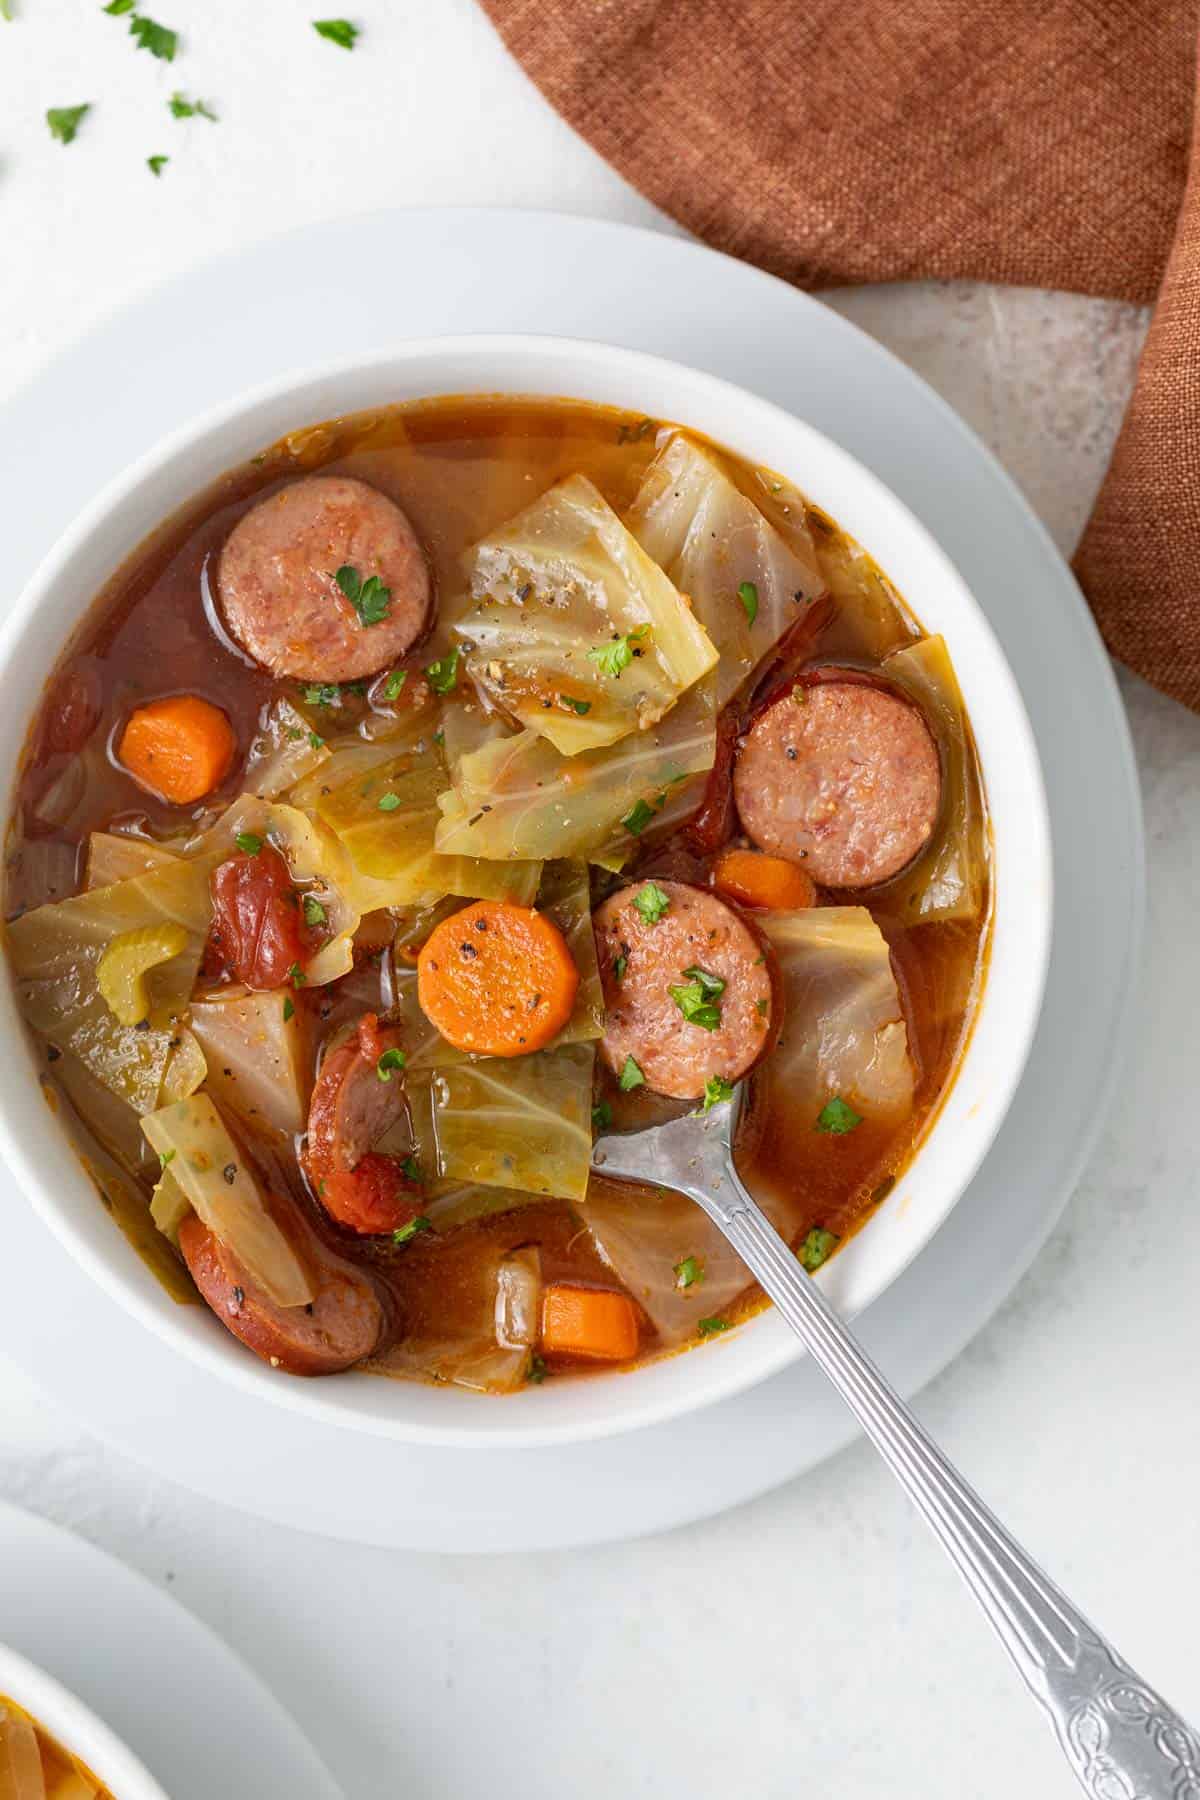 A spoon in a white bowl of cabbage soup with smoked sausage.